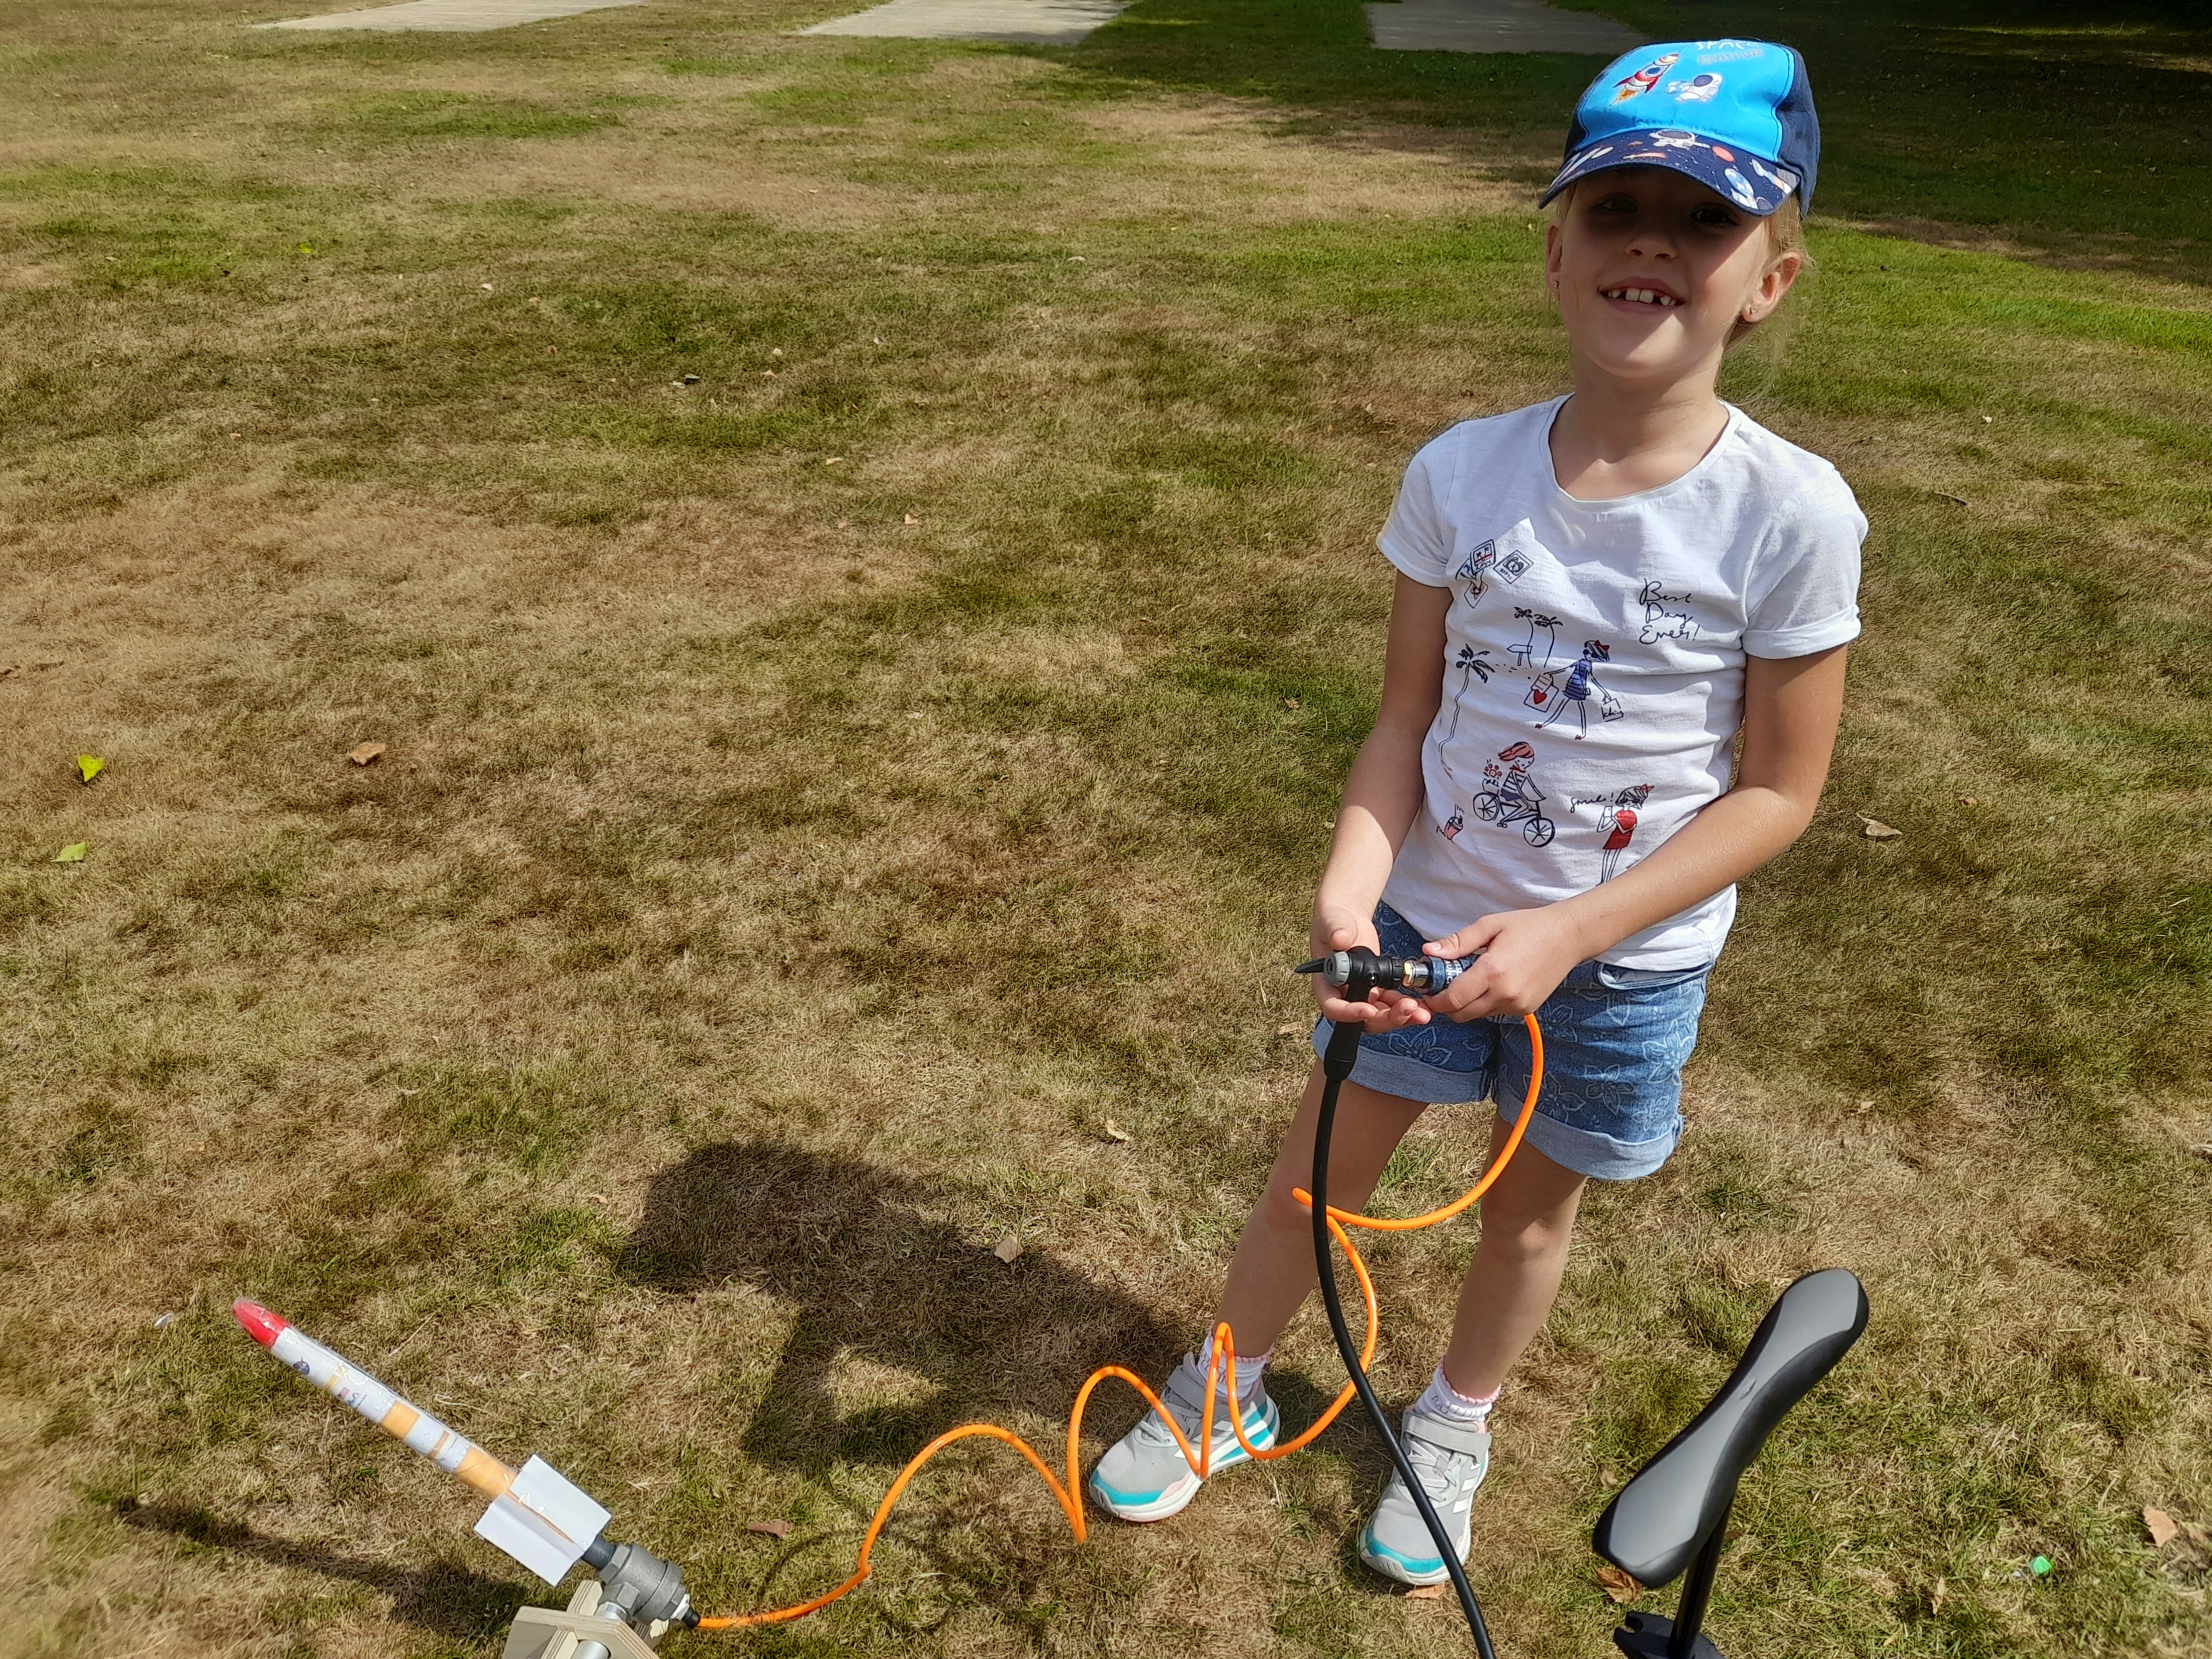 Child Standing with Air Pressure Rocket Kit